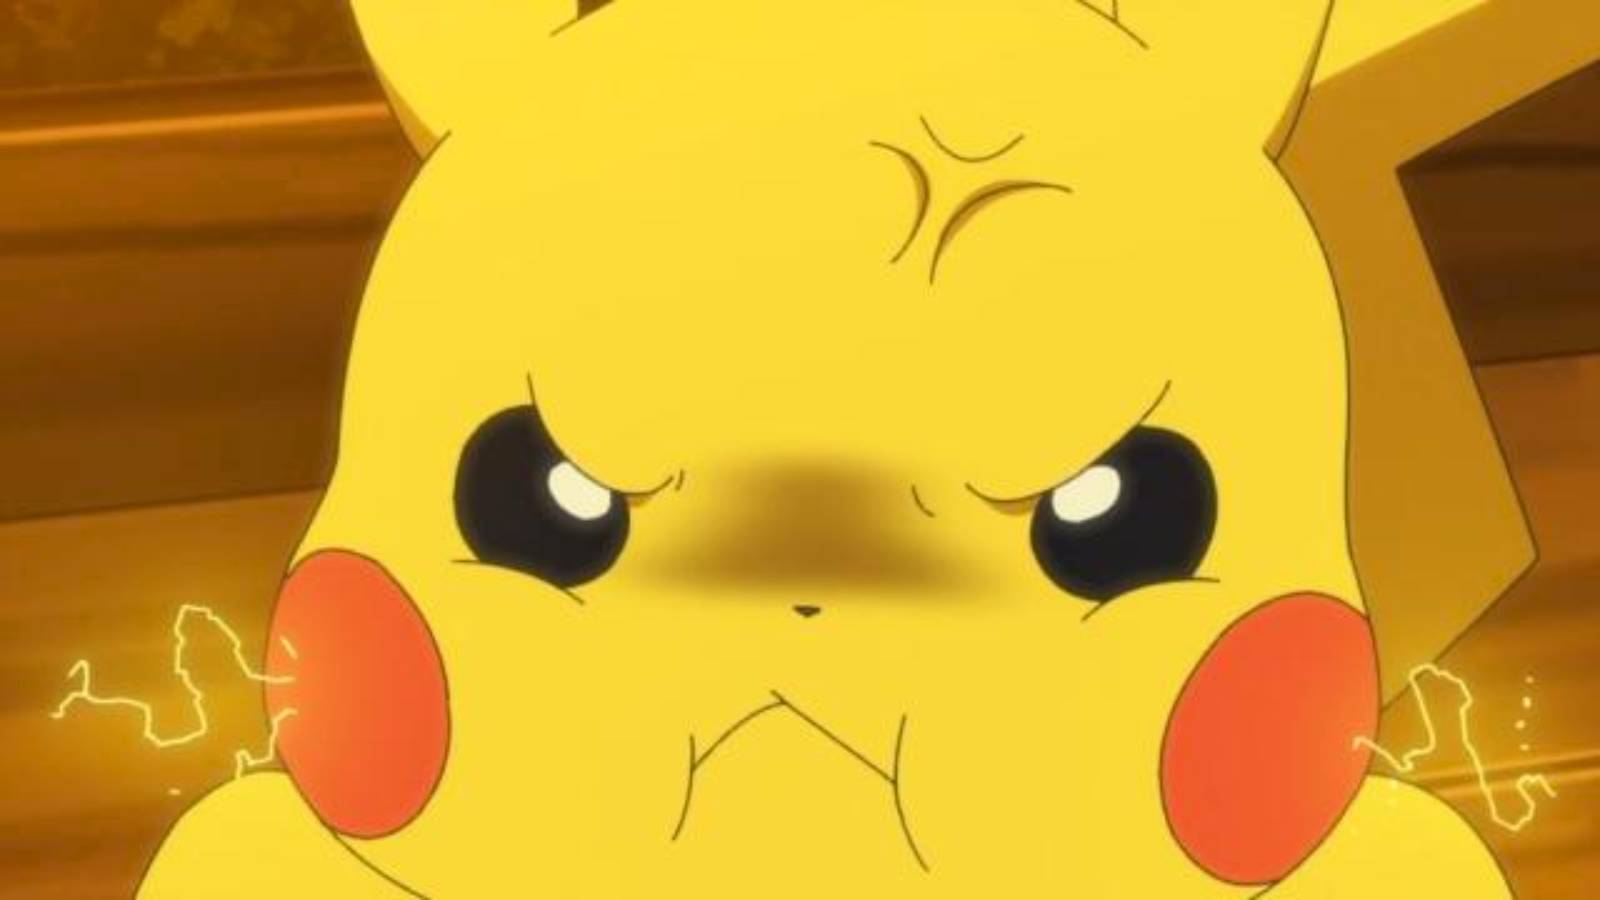 The Pokemon Pikachu being angry.